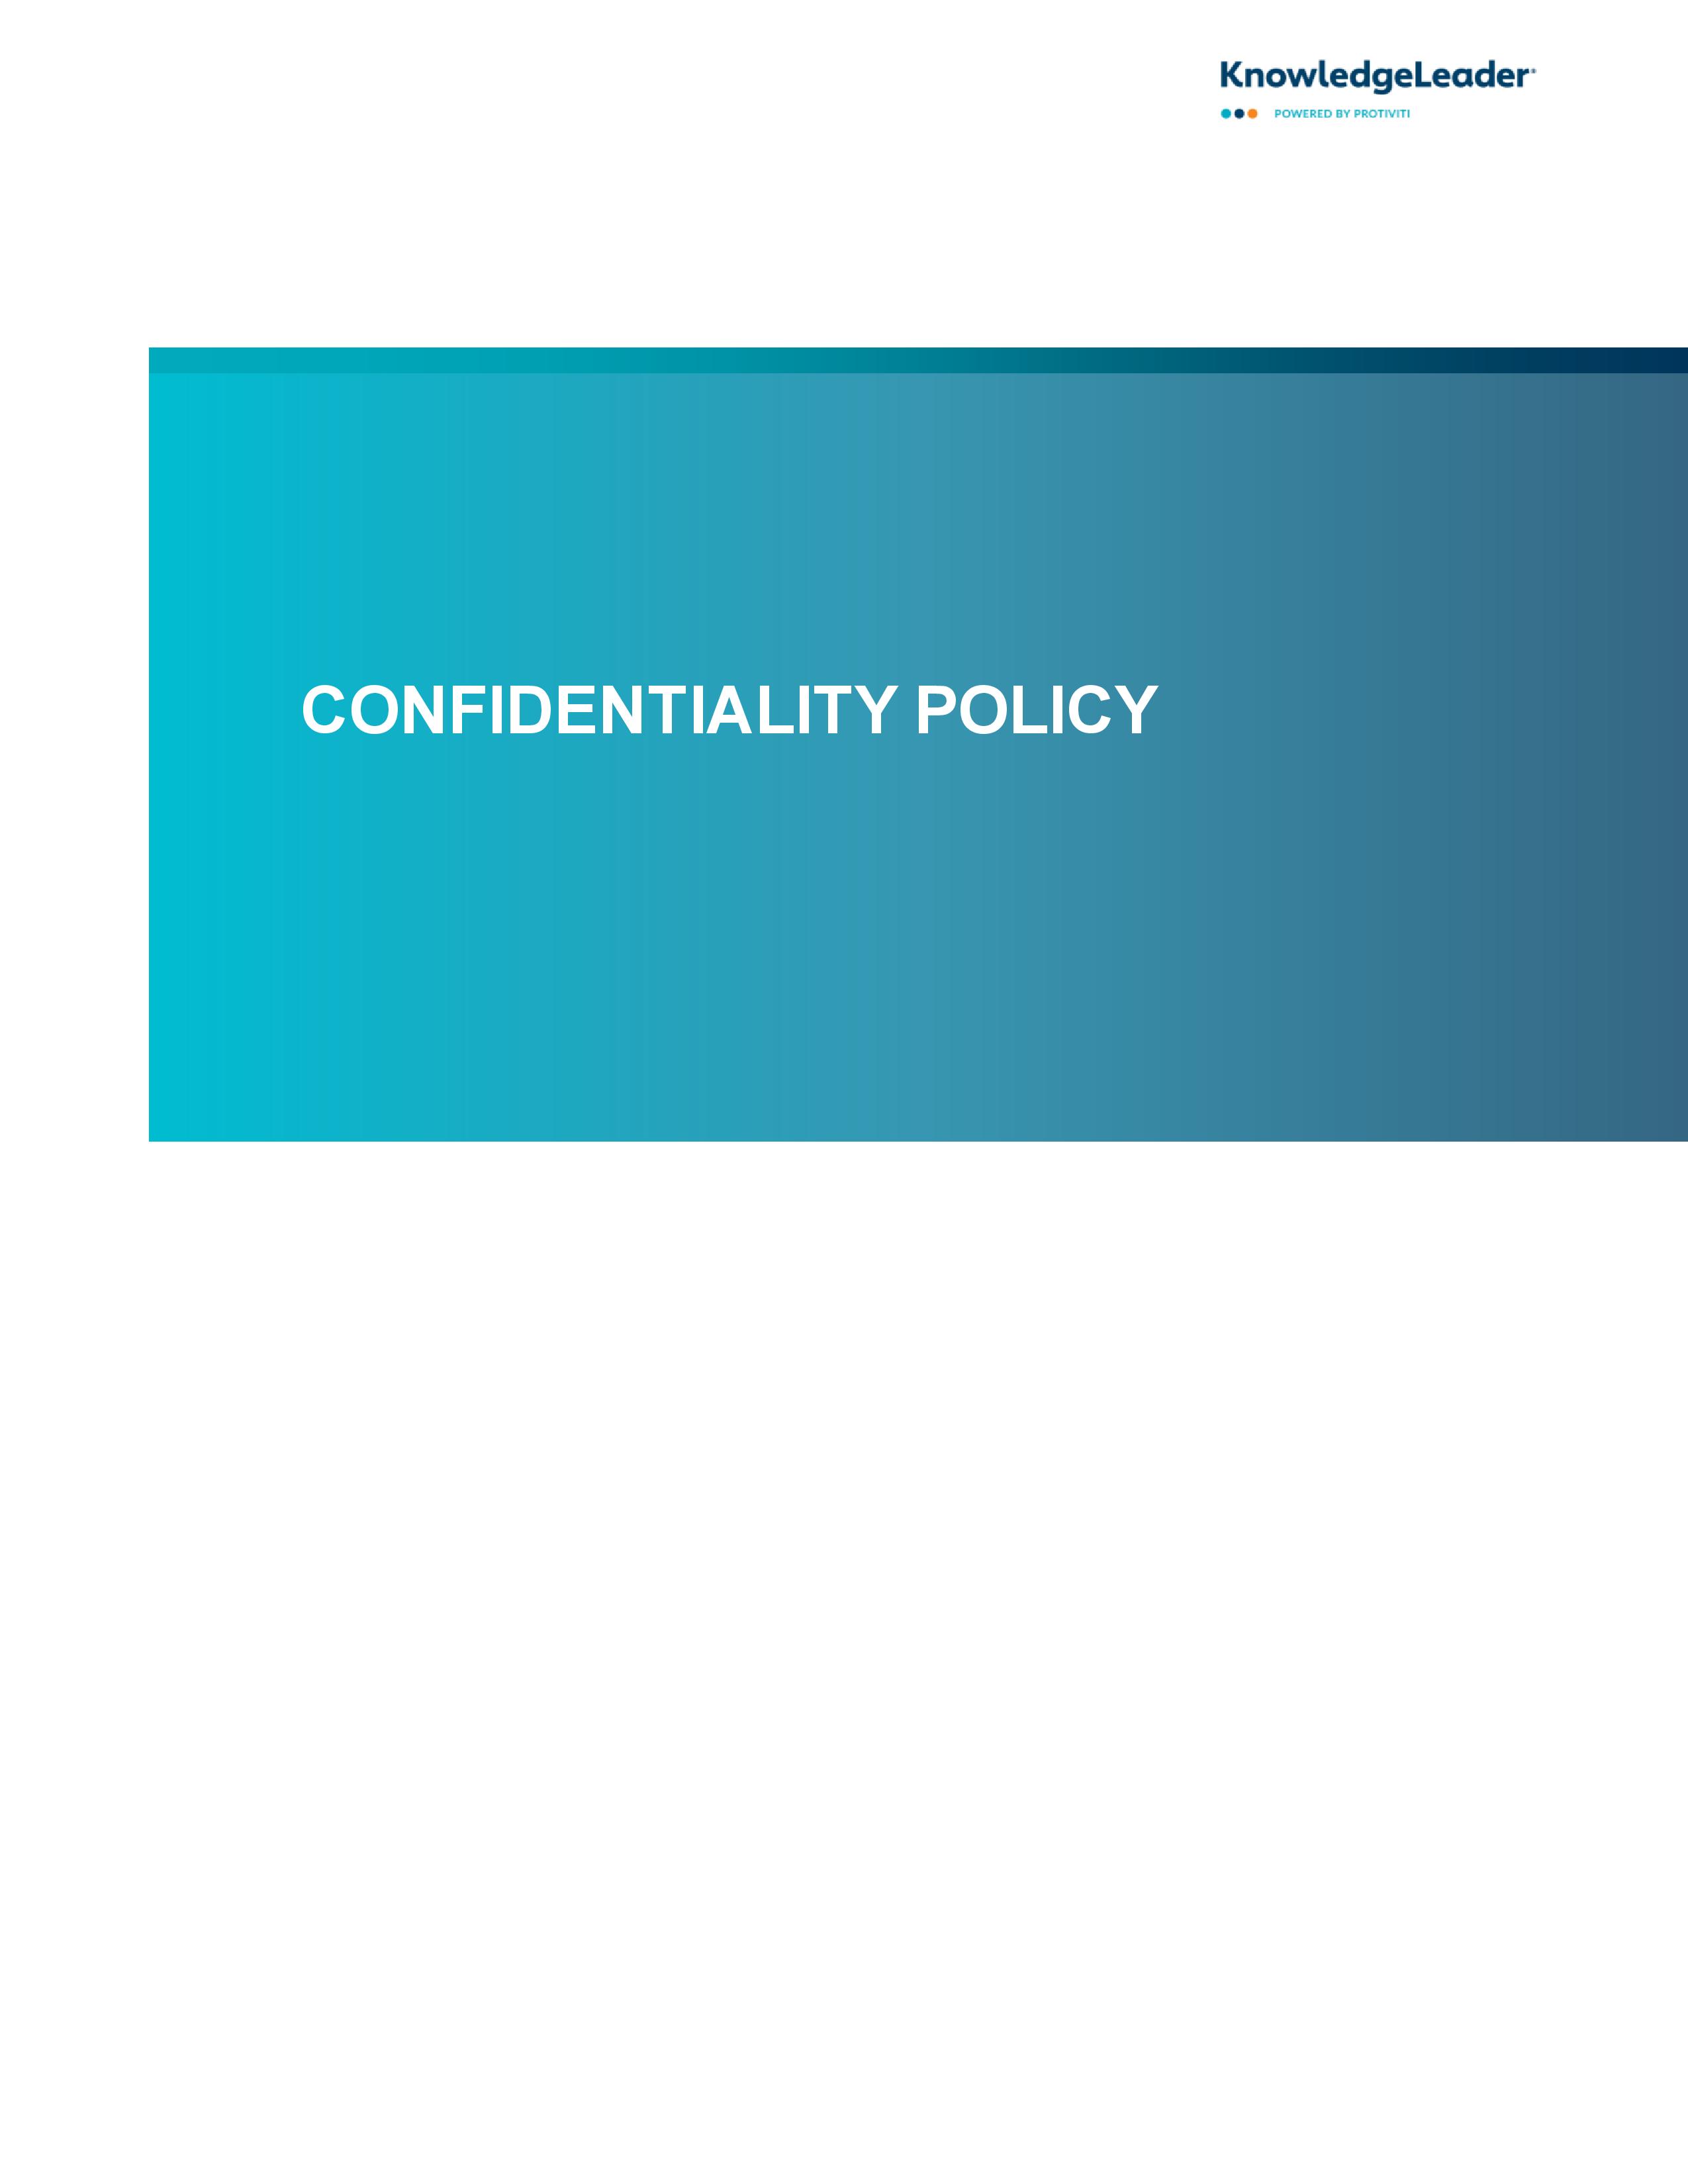 Screenshot of the first page of Confidentiality Policy